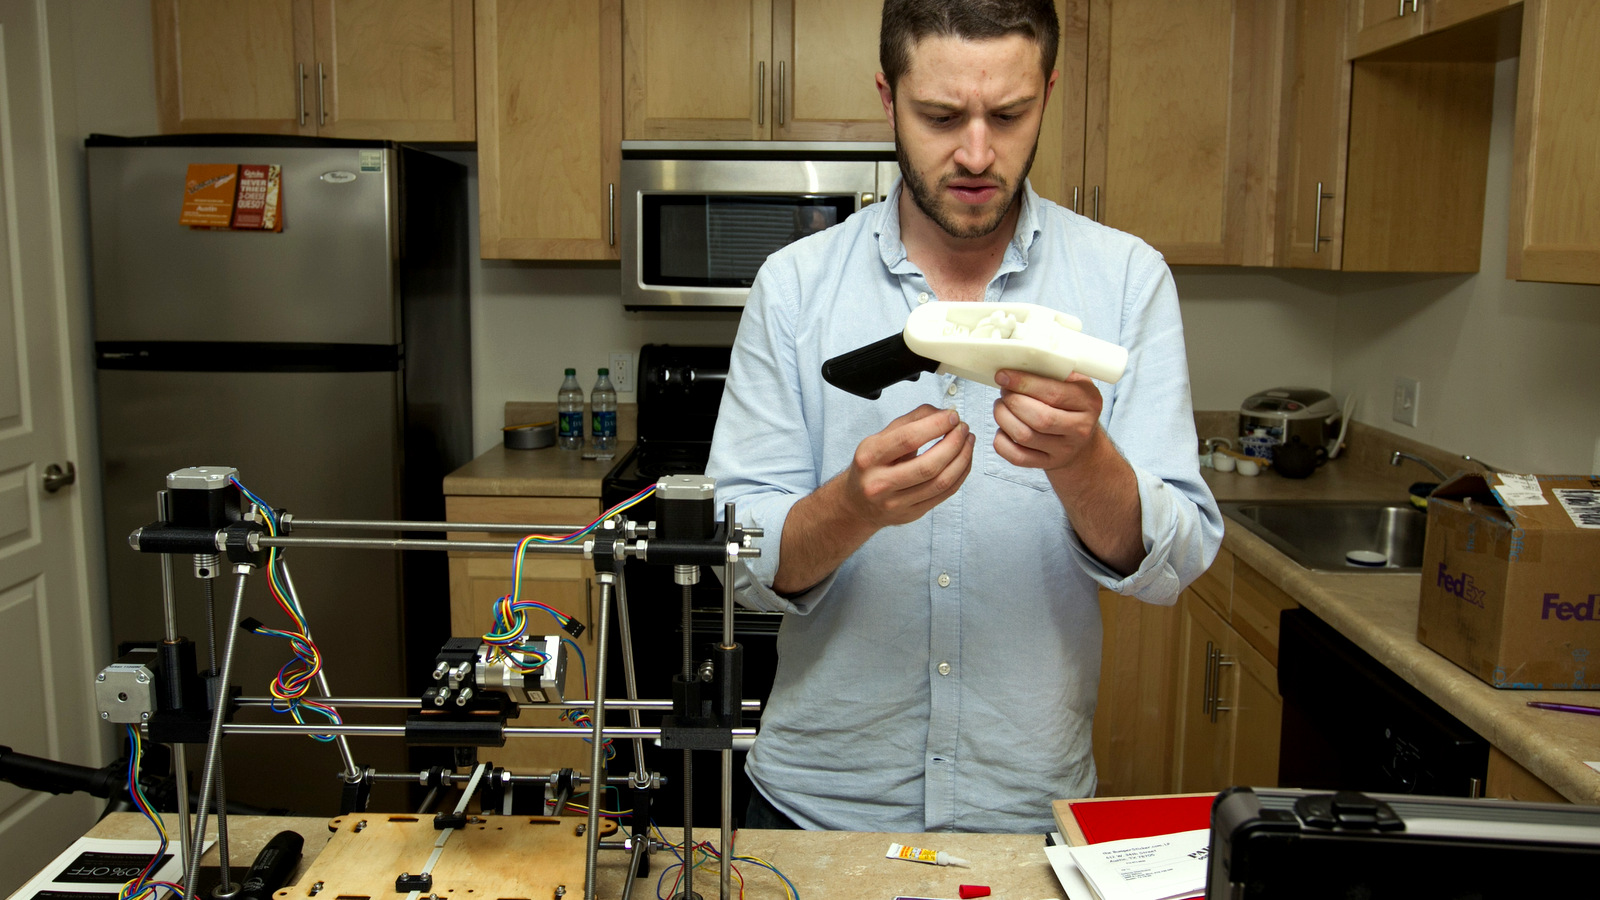 Cody Wilson works on the first completely 3D-printed handgun, The Liberator, at his home in Austin on Friday May 10, 2013. (AP Photo/Austin American Statesman, Jay Janner) 